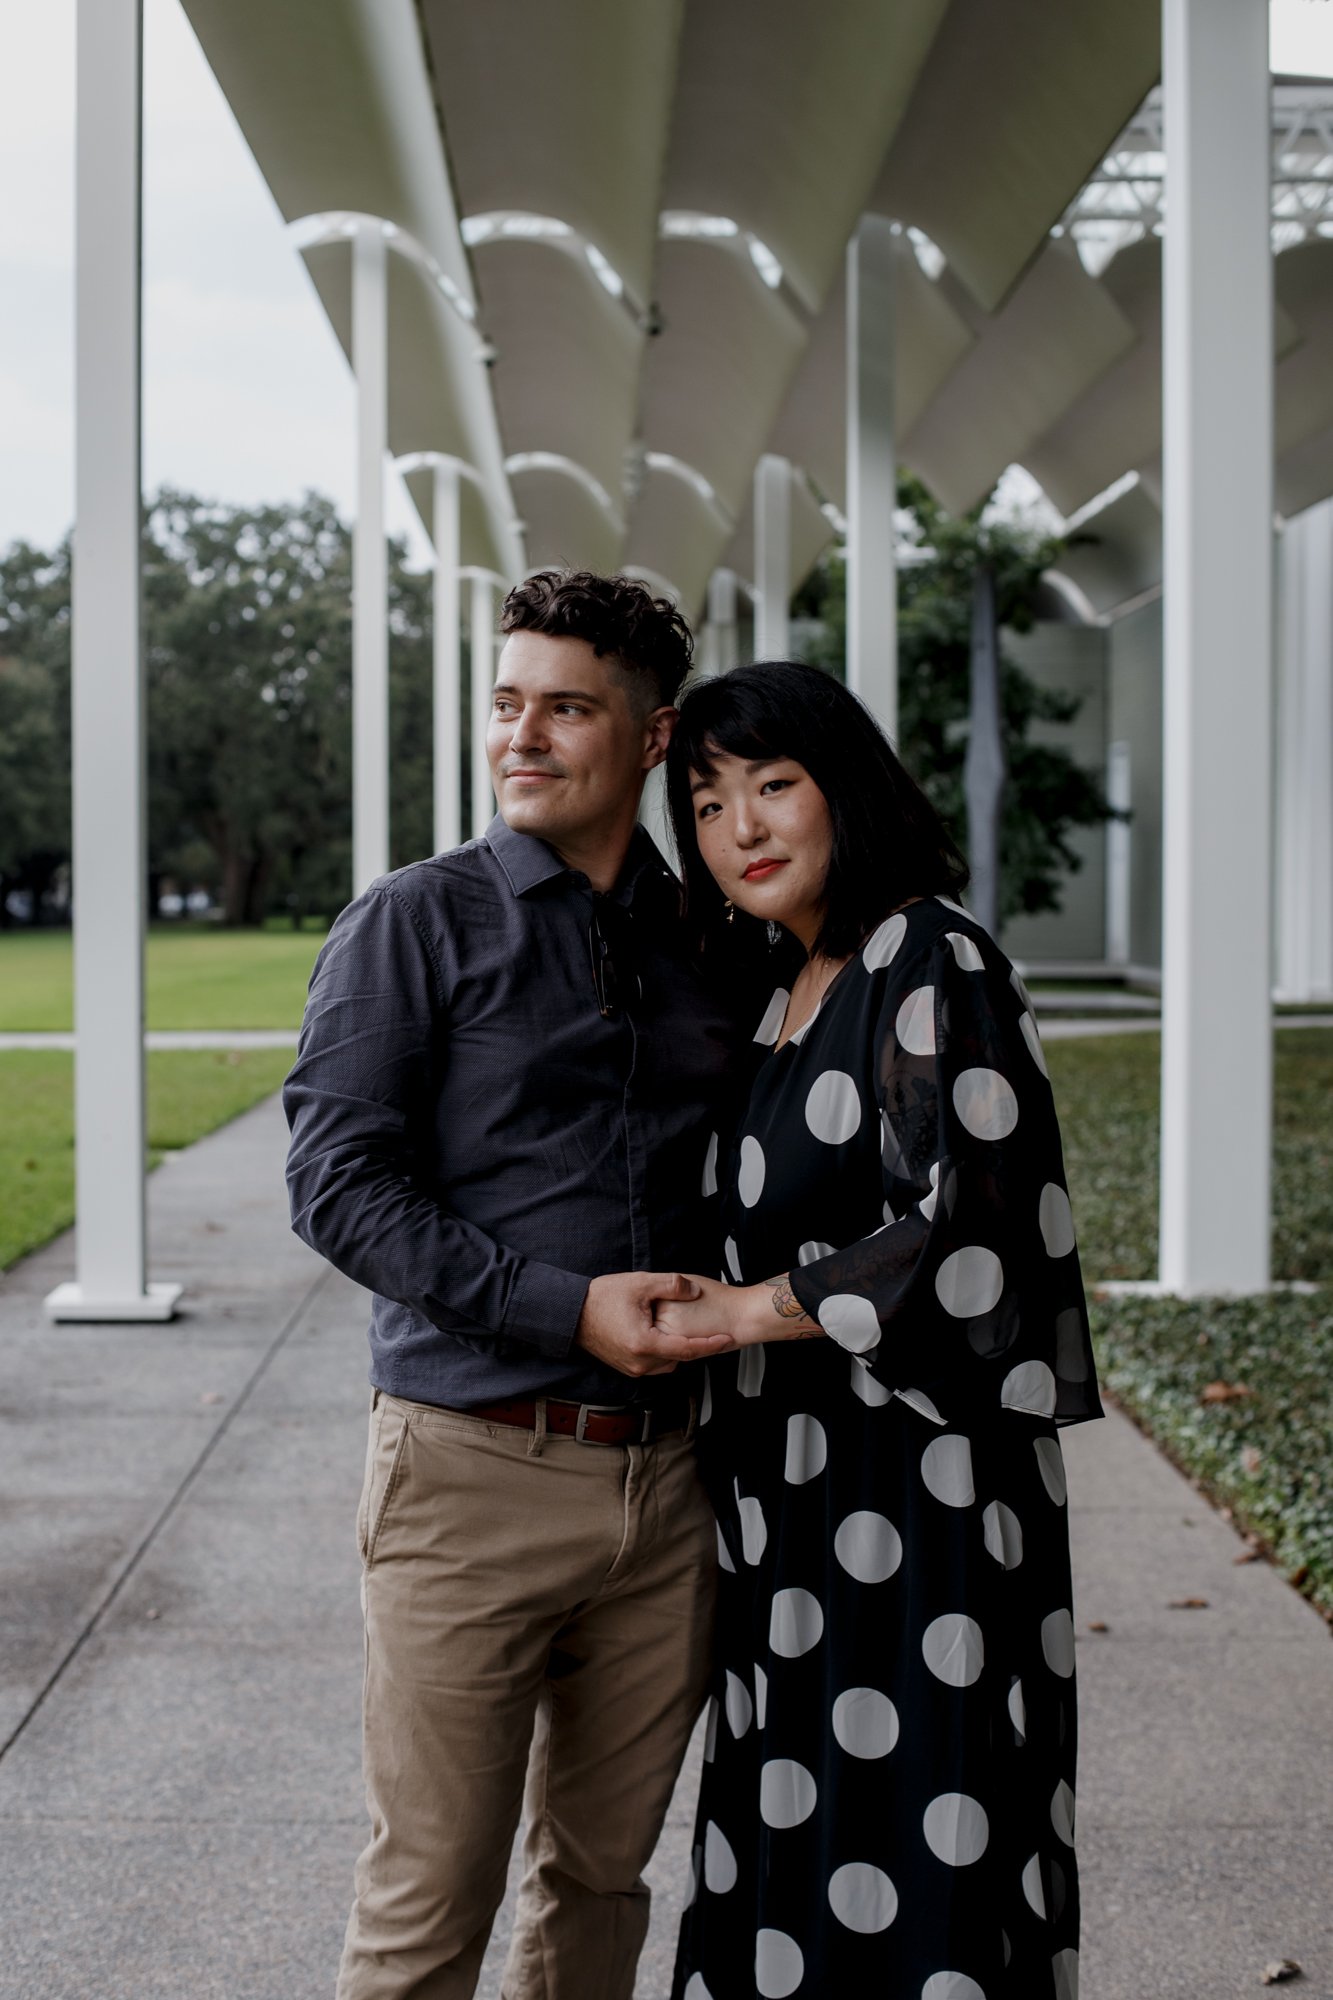 Couple holding hands head to head - Stylish Polka Dot Dress Engagement Photo Session at Menil Park